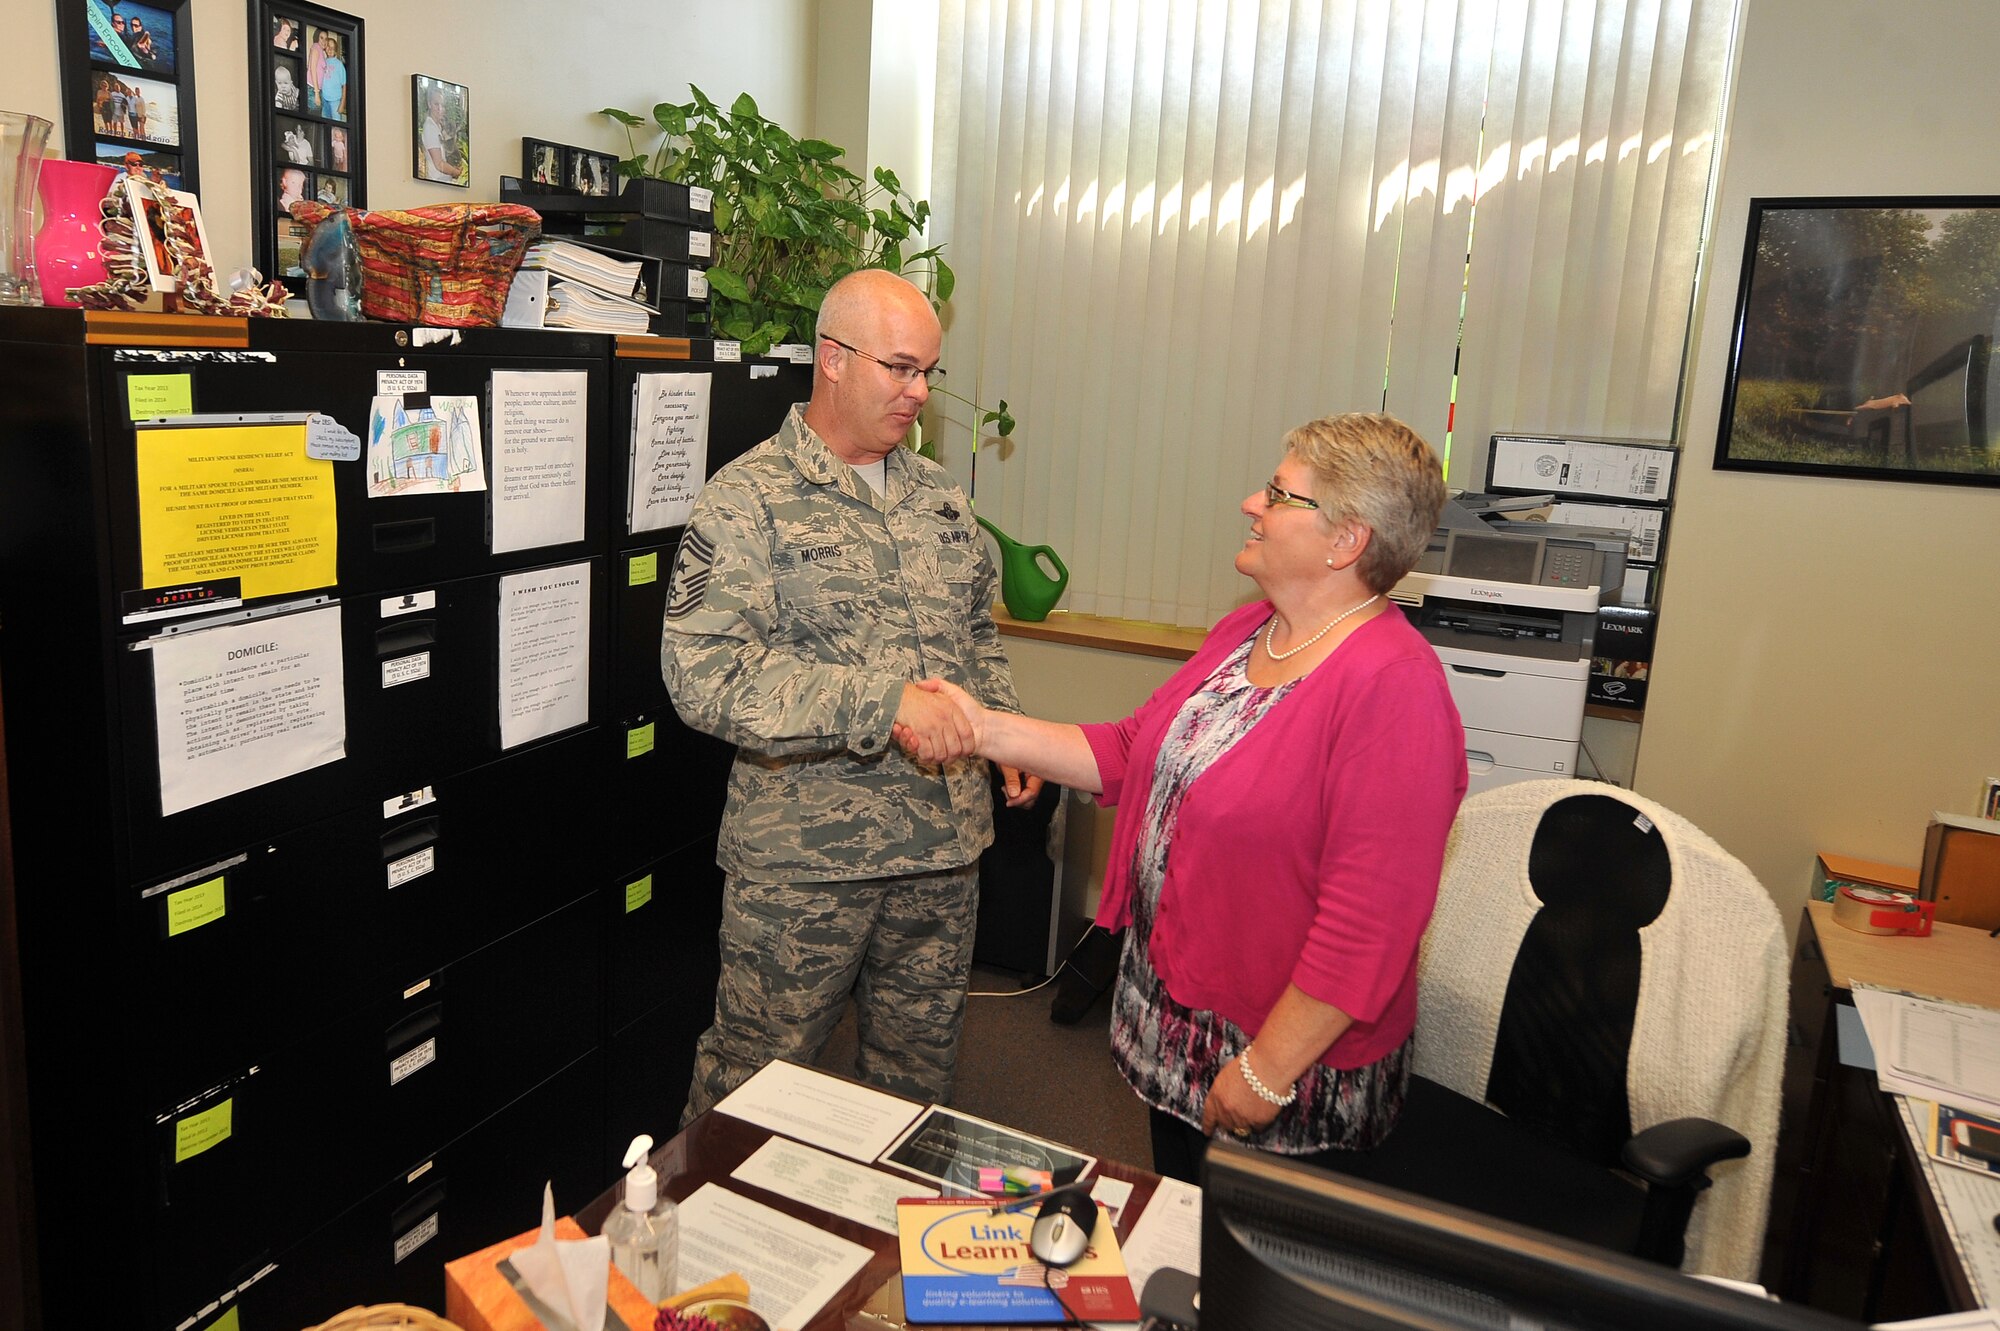 U.S. Air Force Chief Master Sgt. Michael Morris, 55th Wing command chief, coins Pamela Clark, 55th Wing Judge Advocate tax representative, July 31 at the tax center housed out of Offutt Air Force Base, Nebraska, legal office. Clark and her volunteers grossed more than $5 million in refunds last year. (U.S. Air Force photo by Josh Plueger)